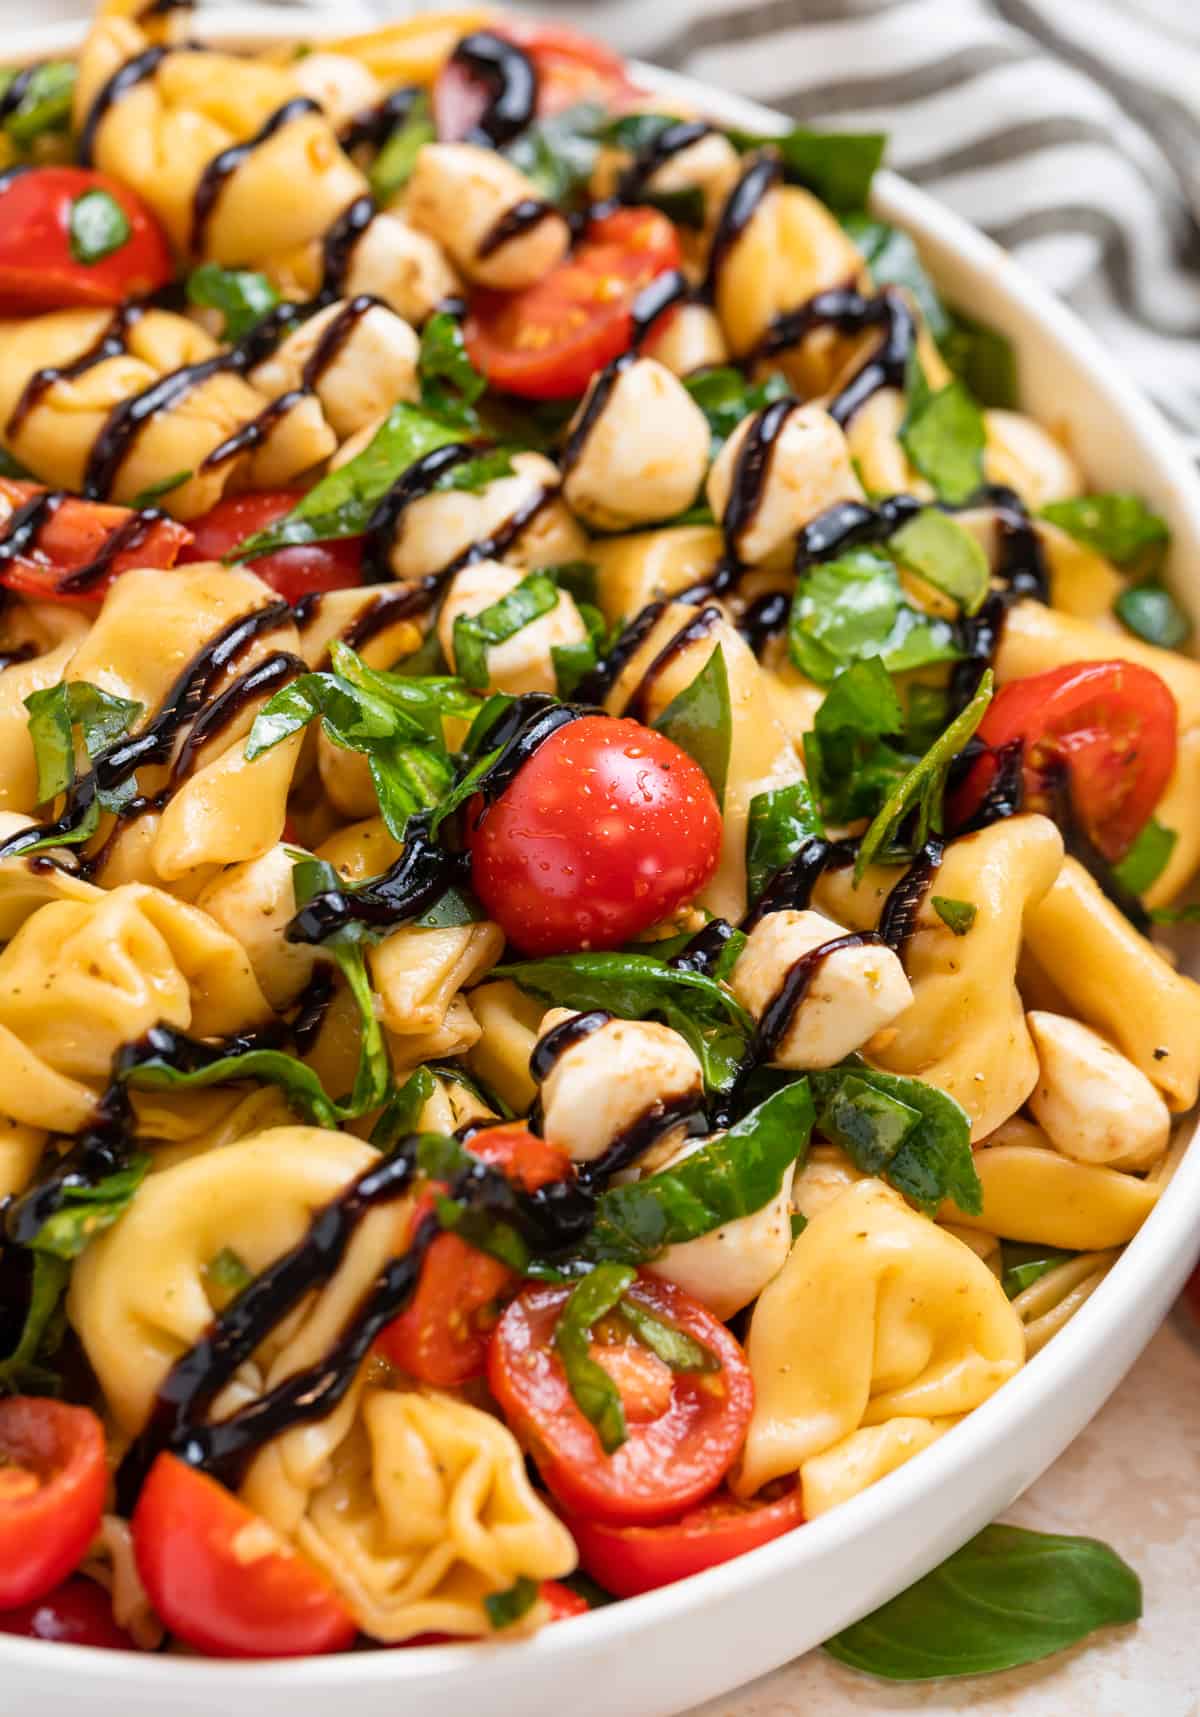 Tortellini pasta salad in white bowl with balsamic glaze drizzled on top.